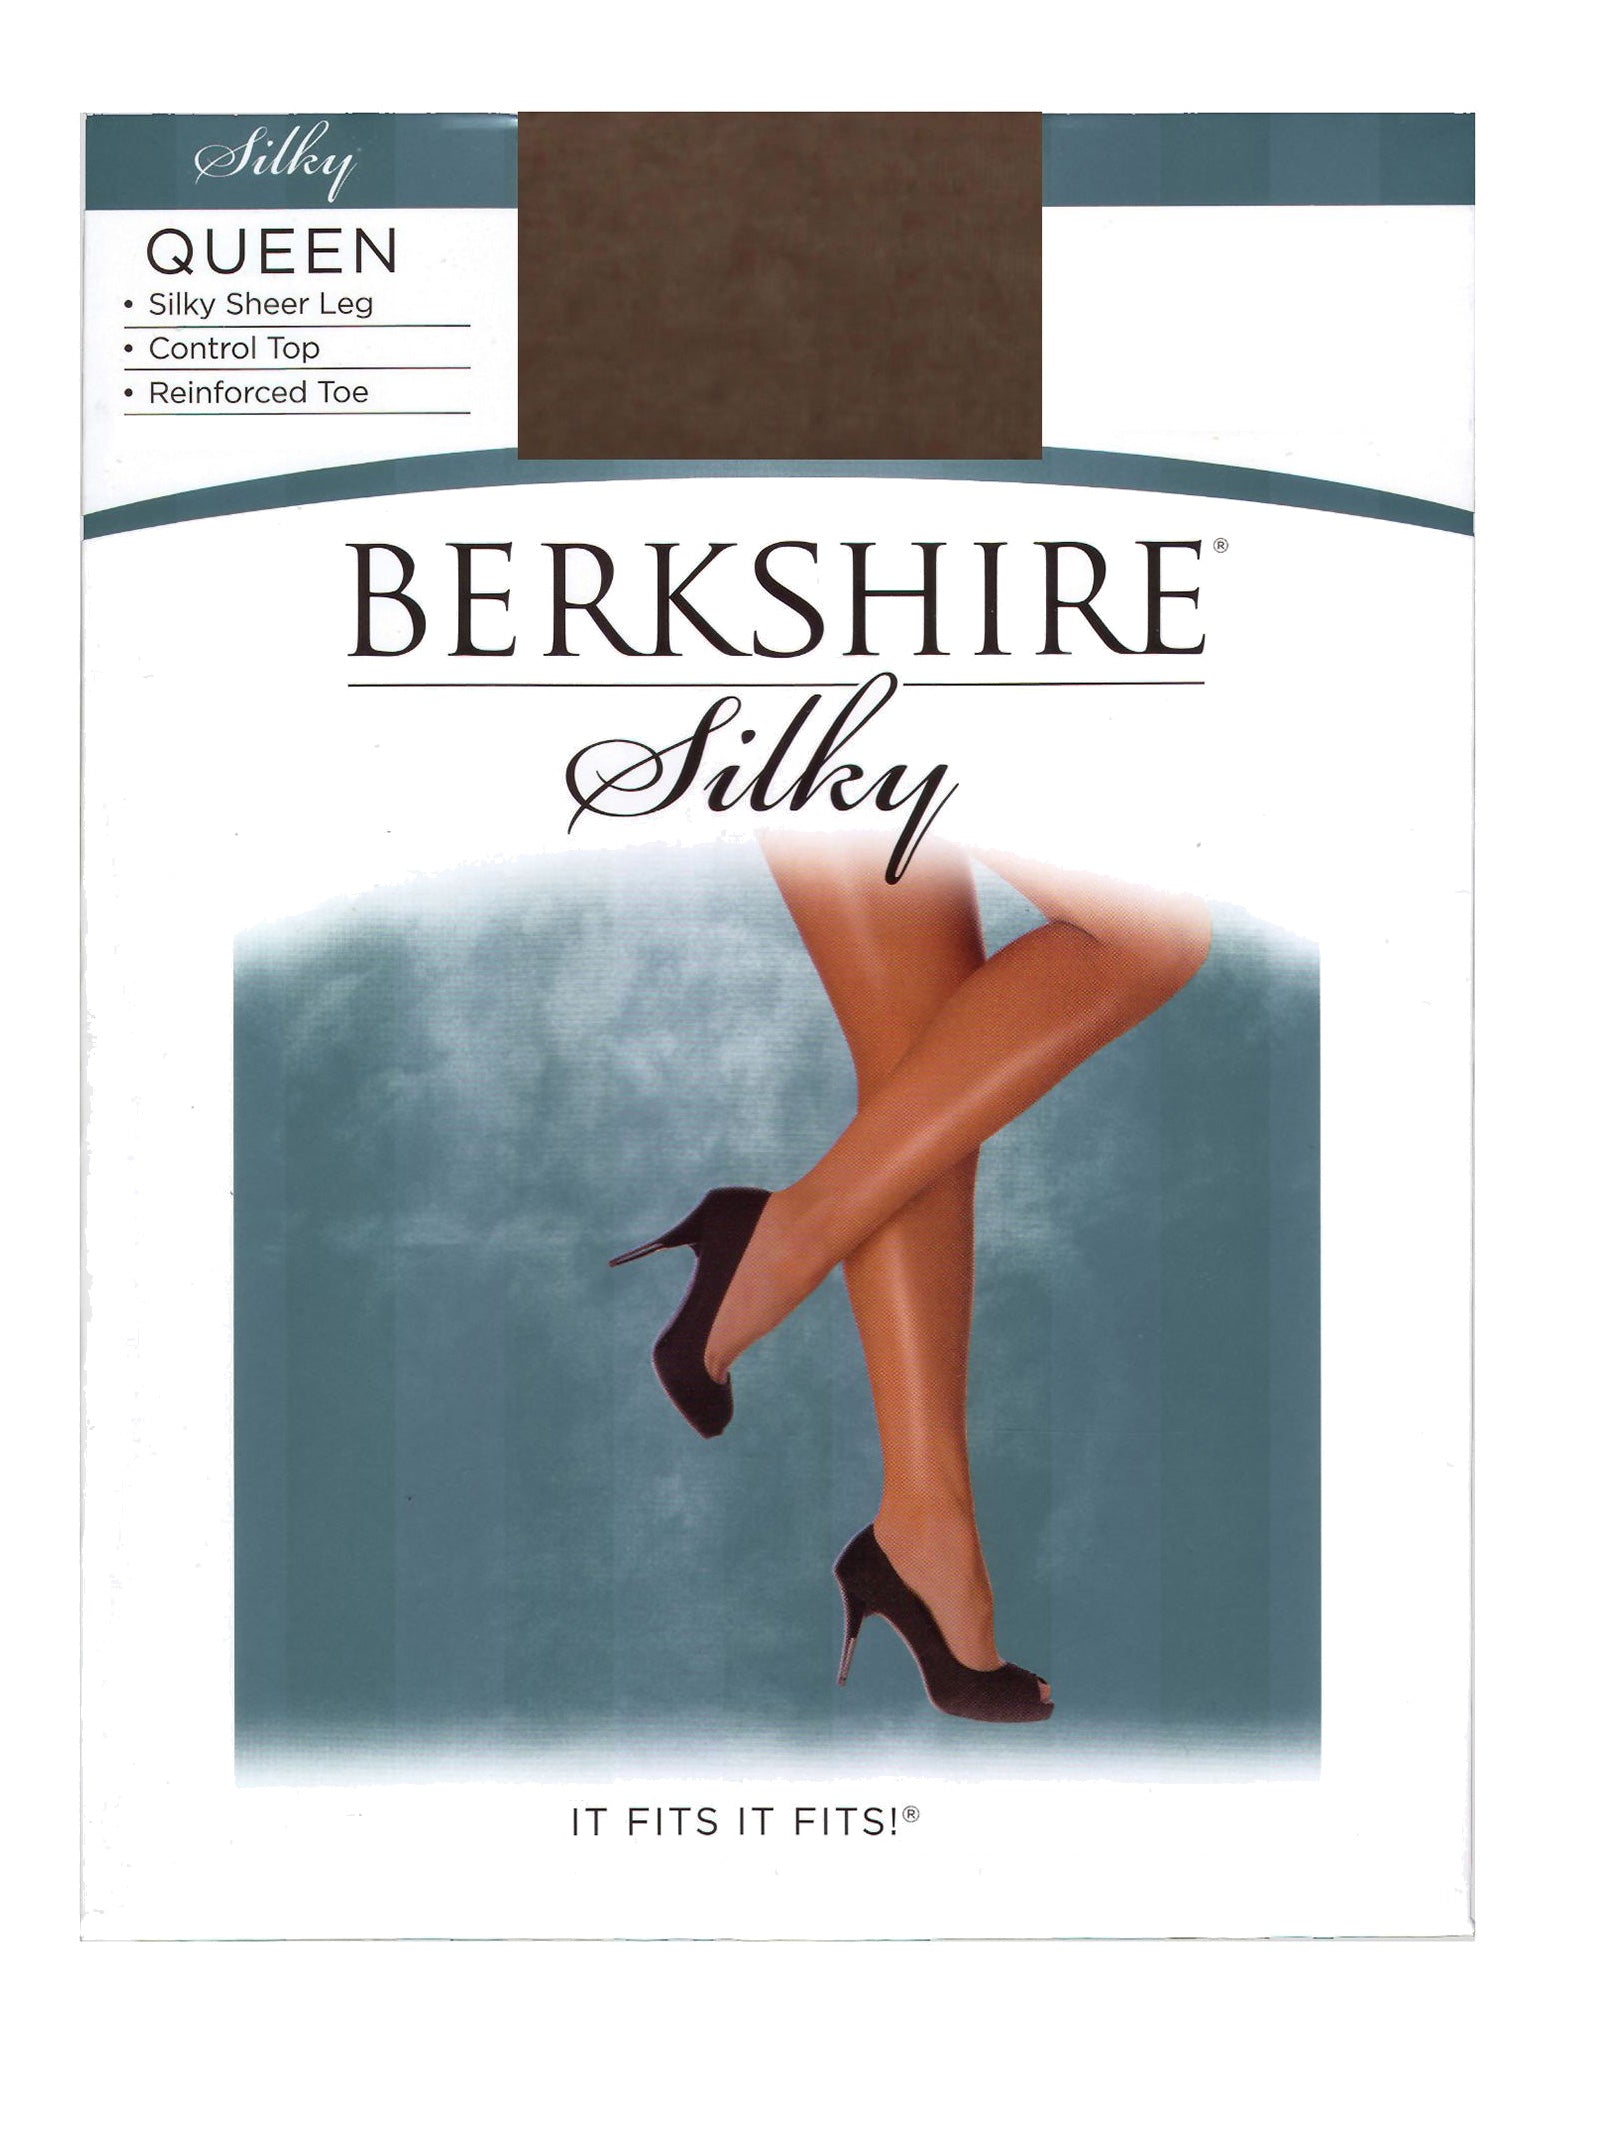 Queen Silky Sheer Extra Wear Control Top Pantyhose with Reinforced Toe - 4489